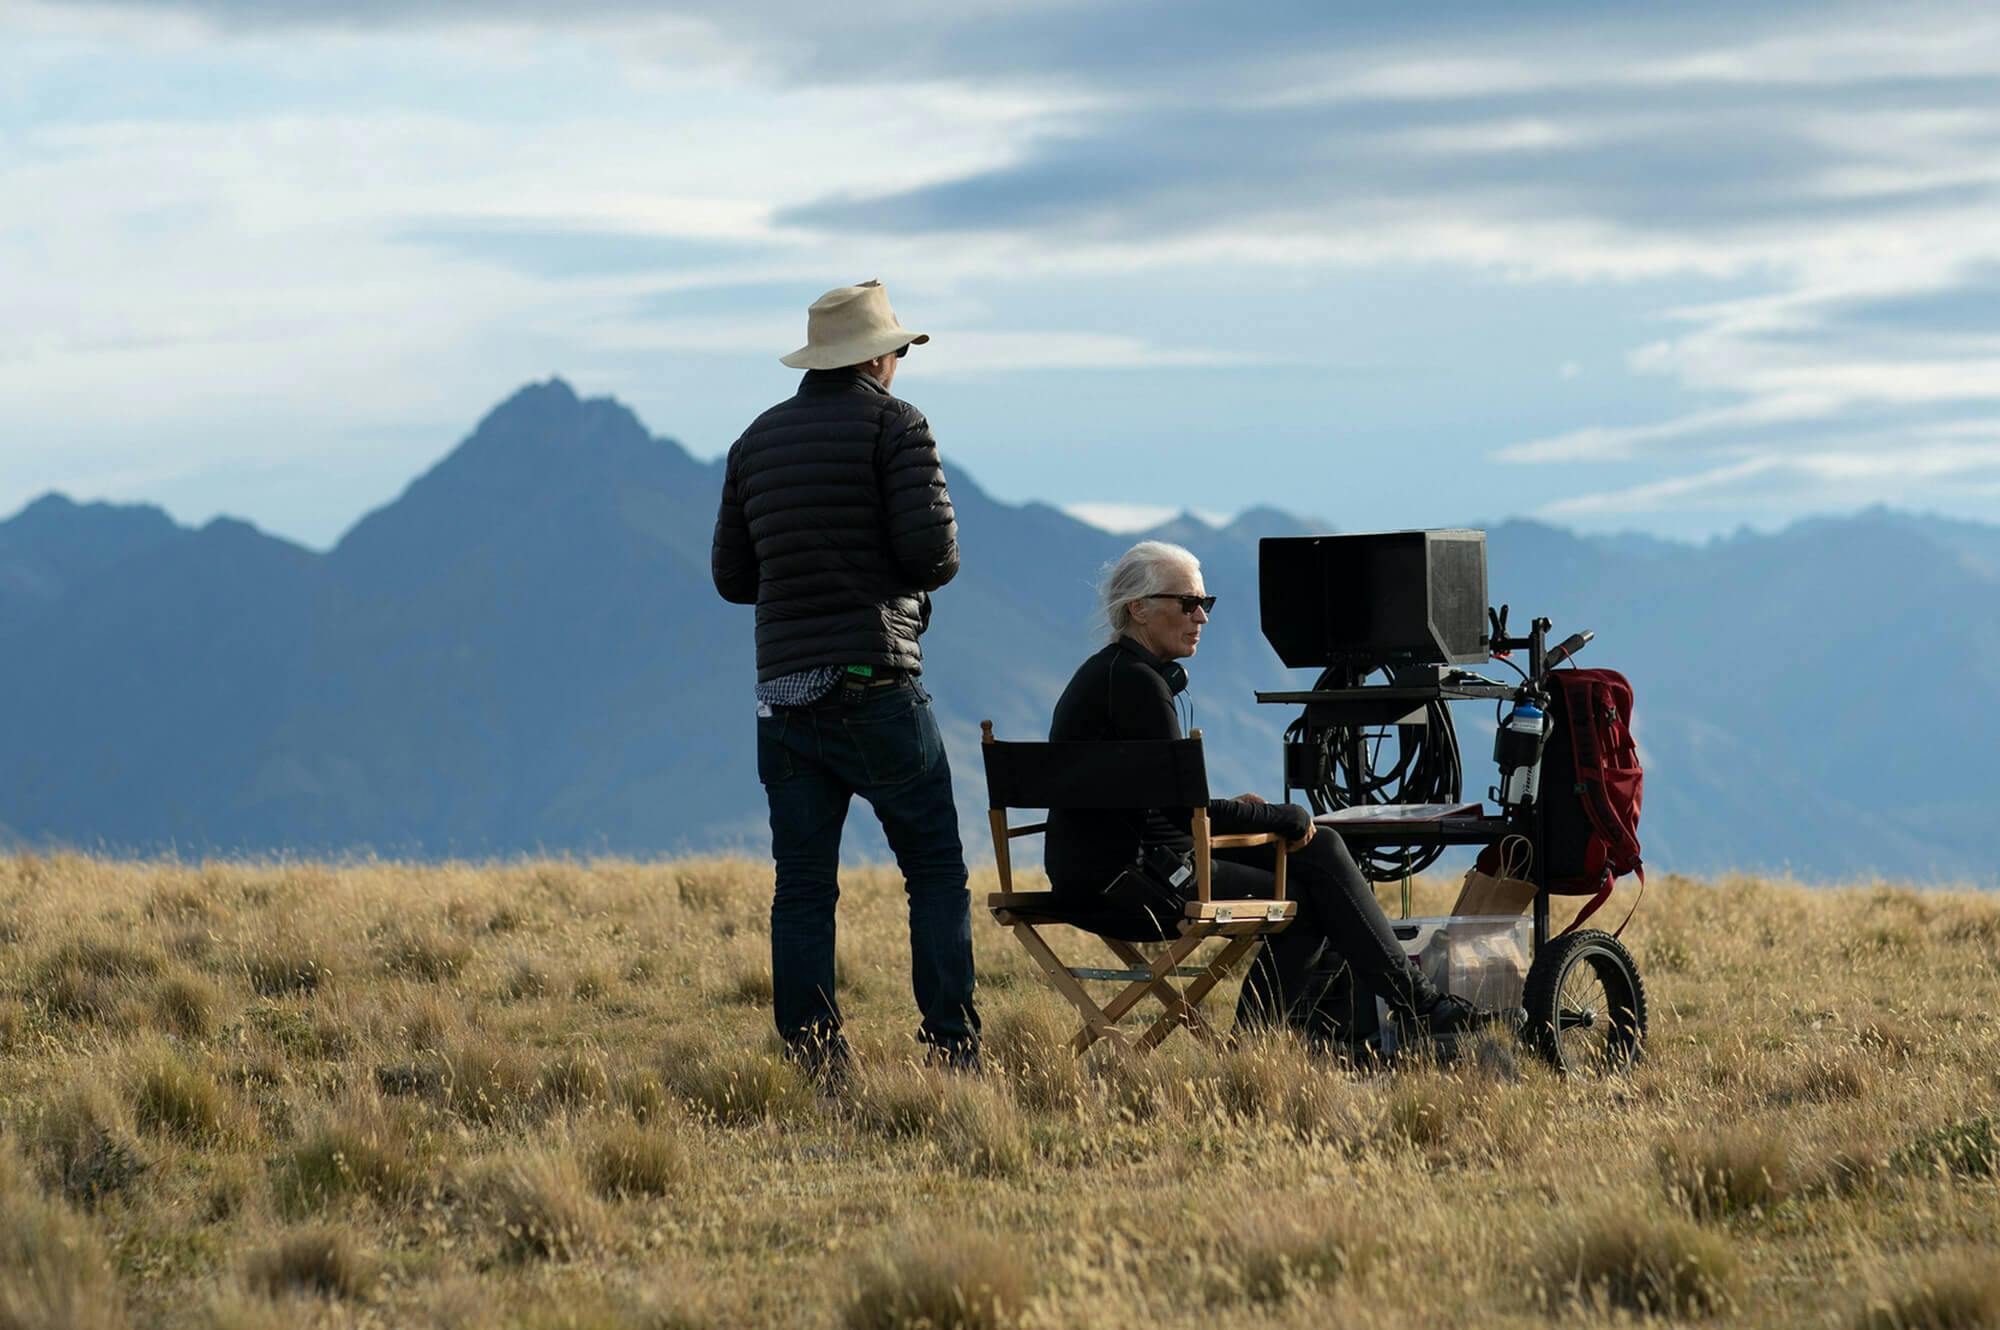 Producer Phil Jones and director Jane Campion stand in a windswept field, in dark clothing. In the background are dark blue mountains and a cloudy sky.